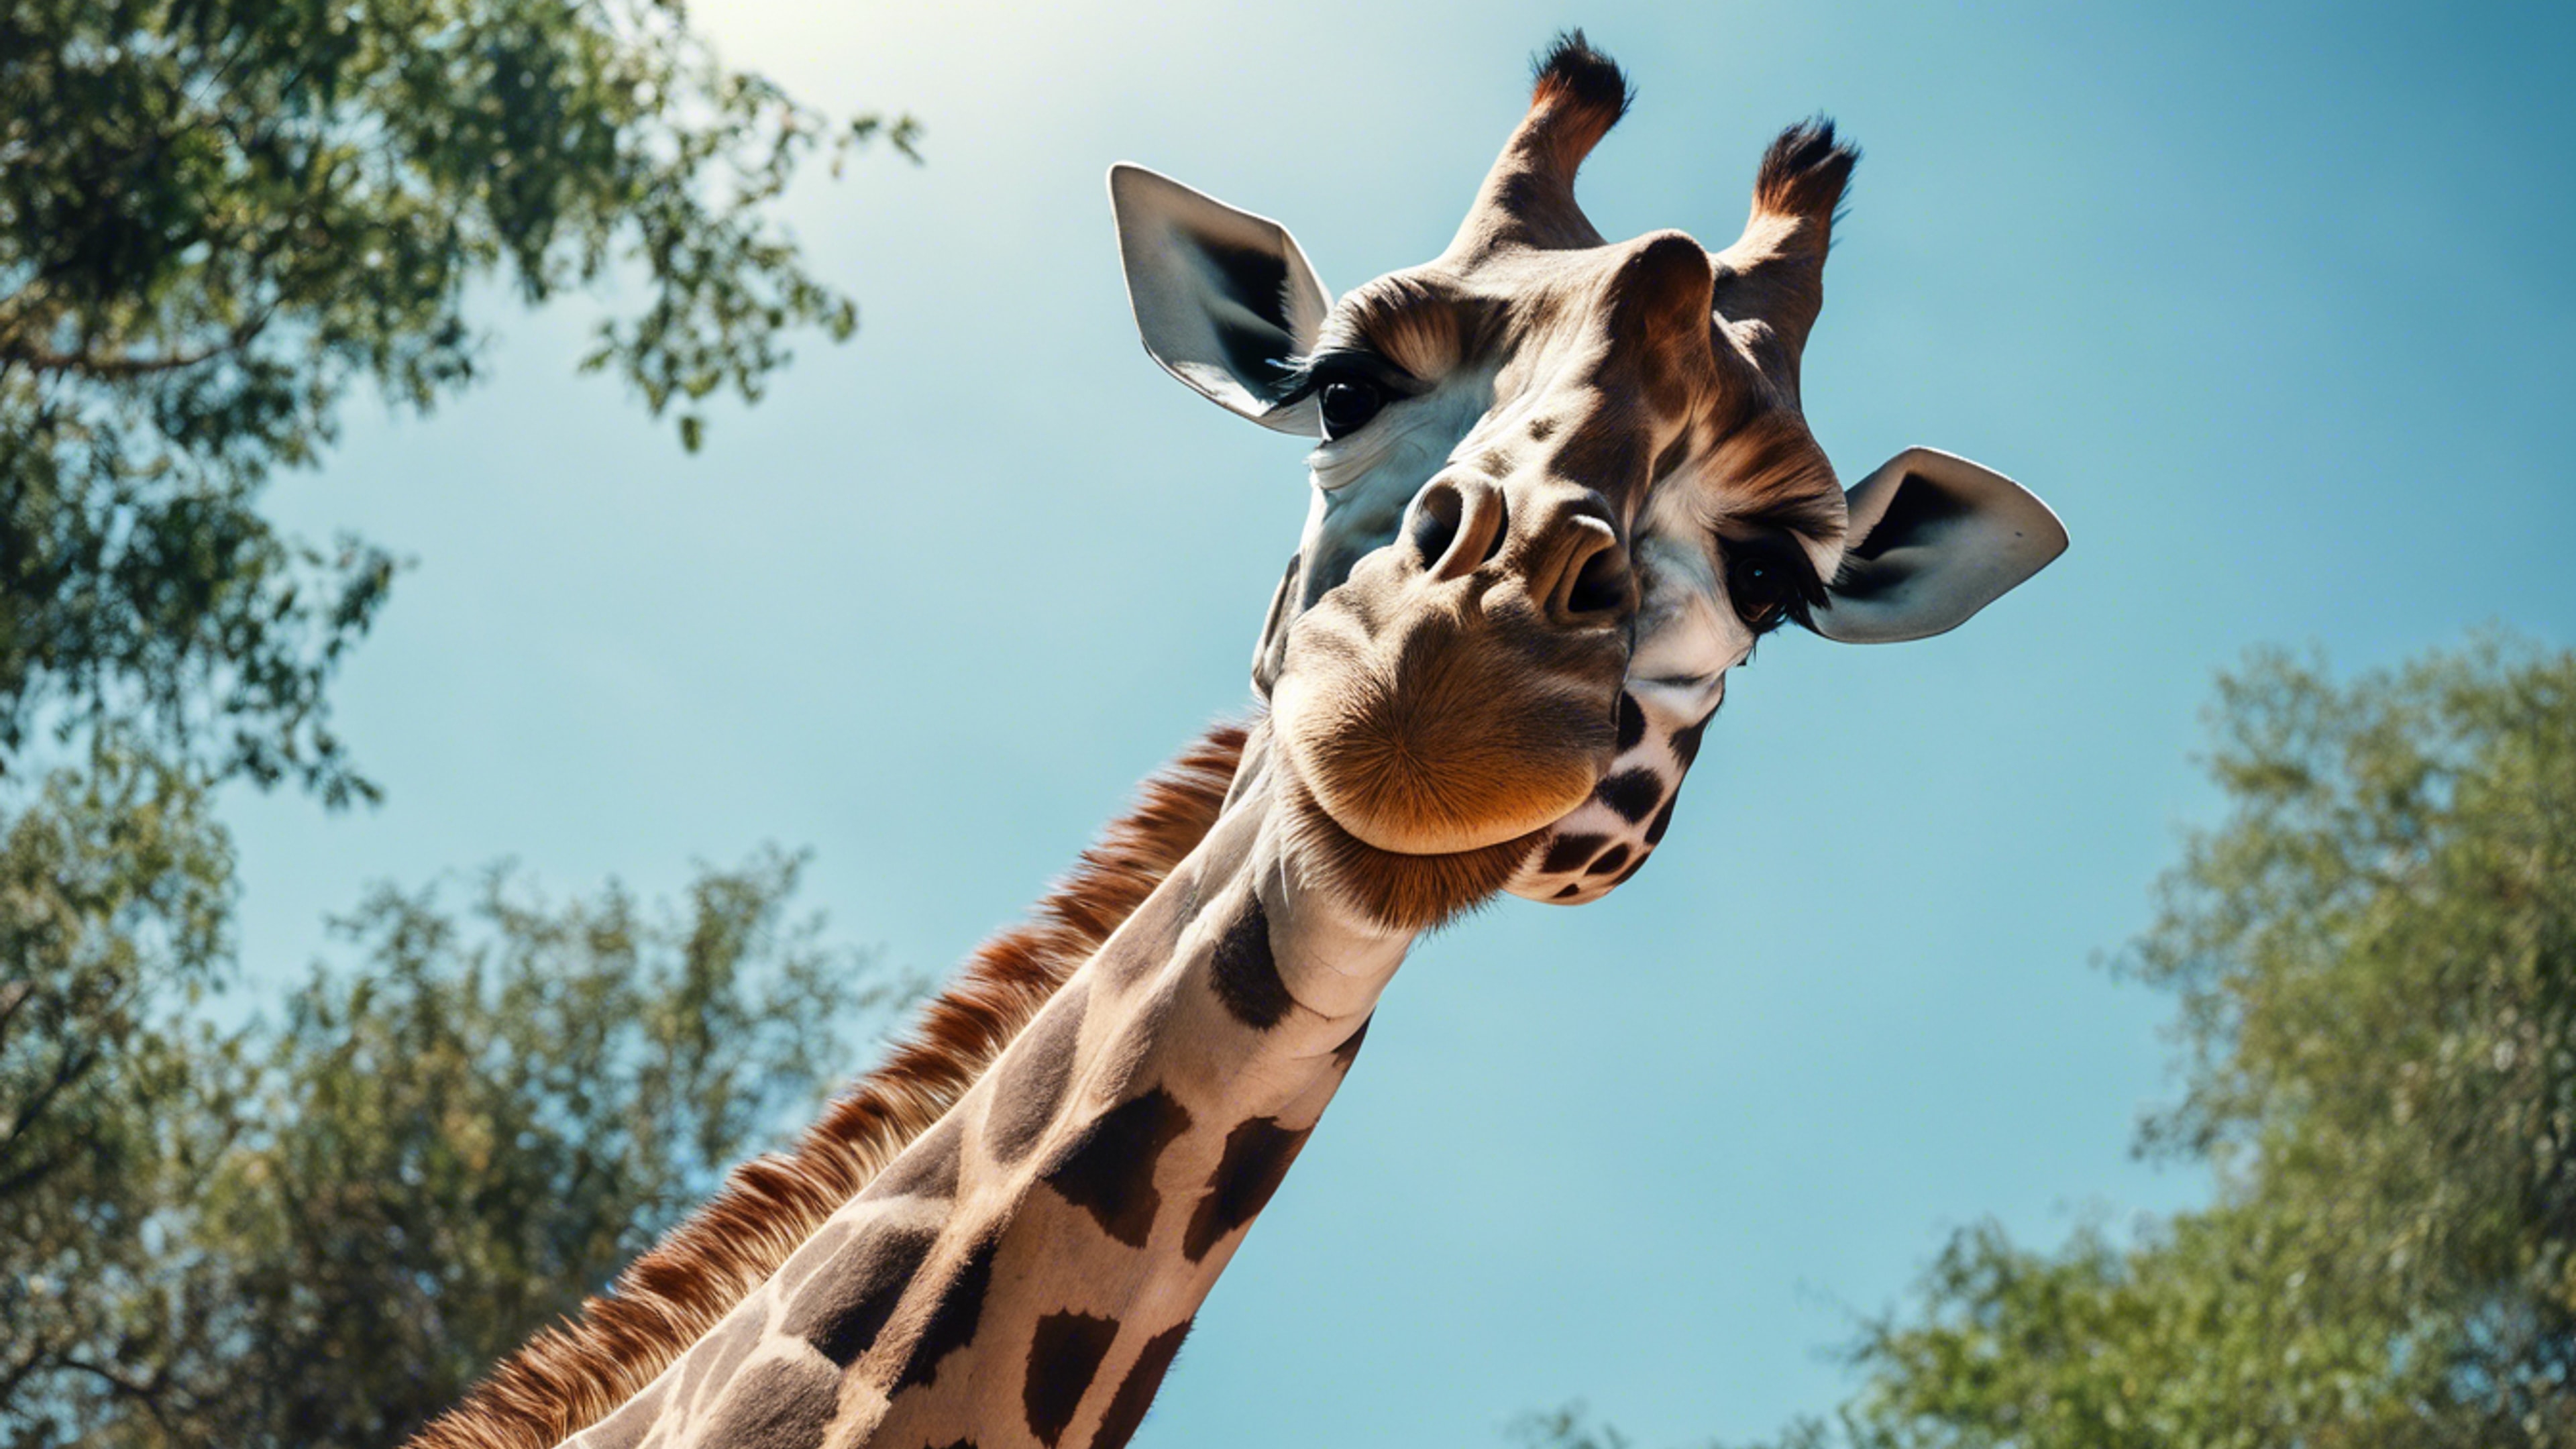 A picture from a below angle showing the towering magnificence of a giraffe against a clear blue sky. Hintergrund[8a88956d9aa2483bb204]